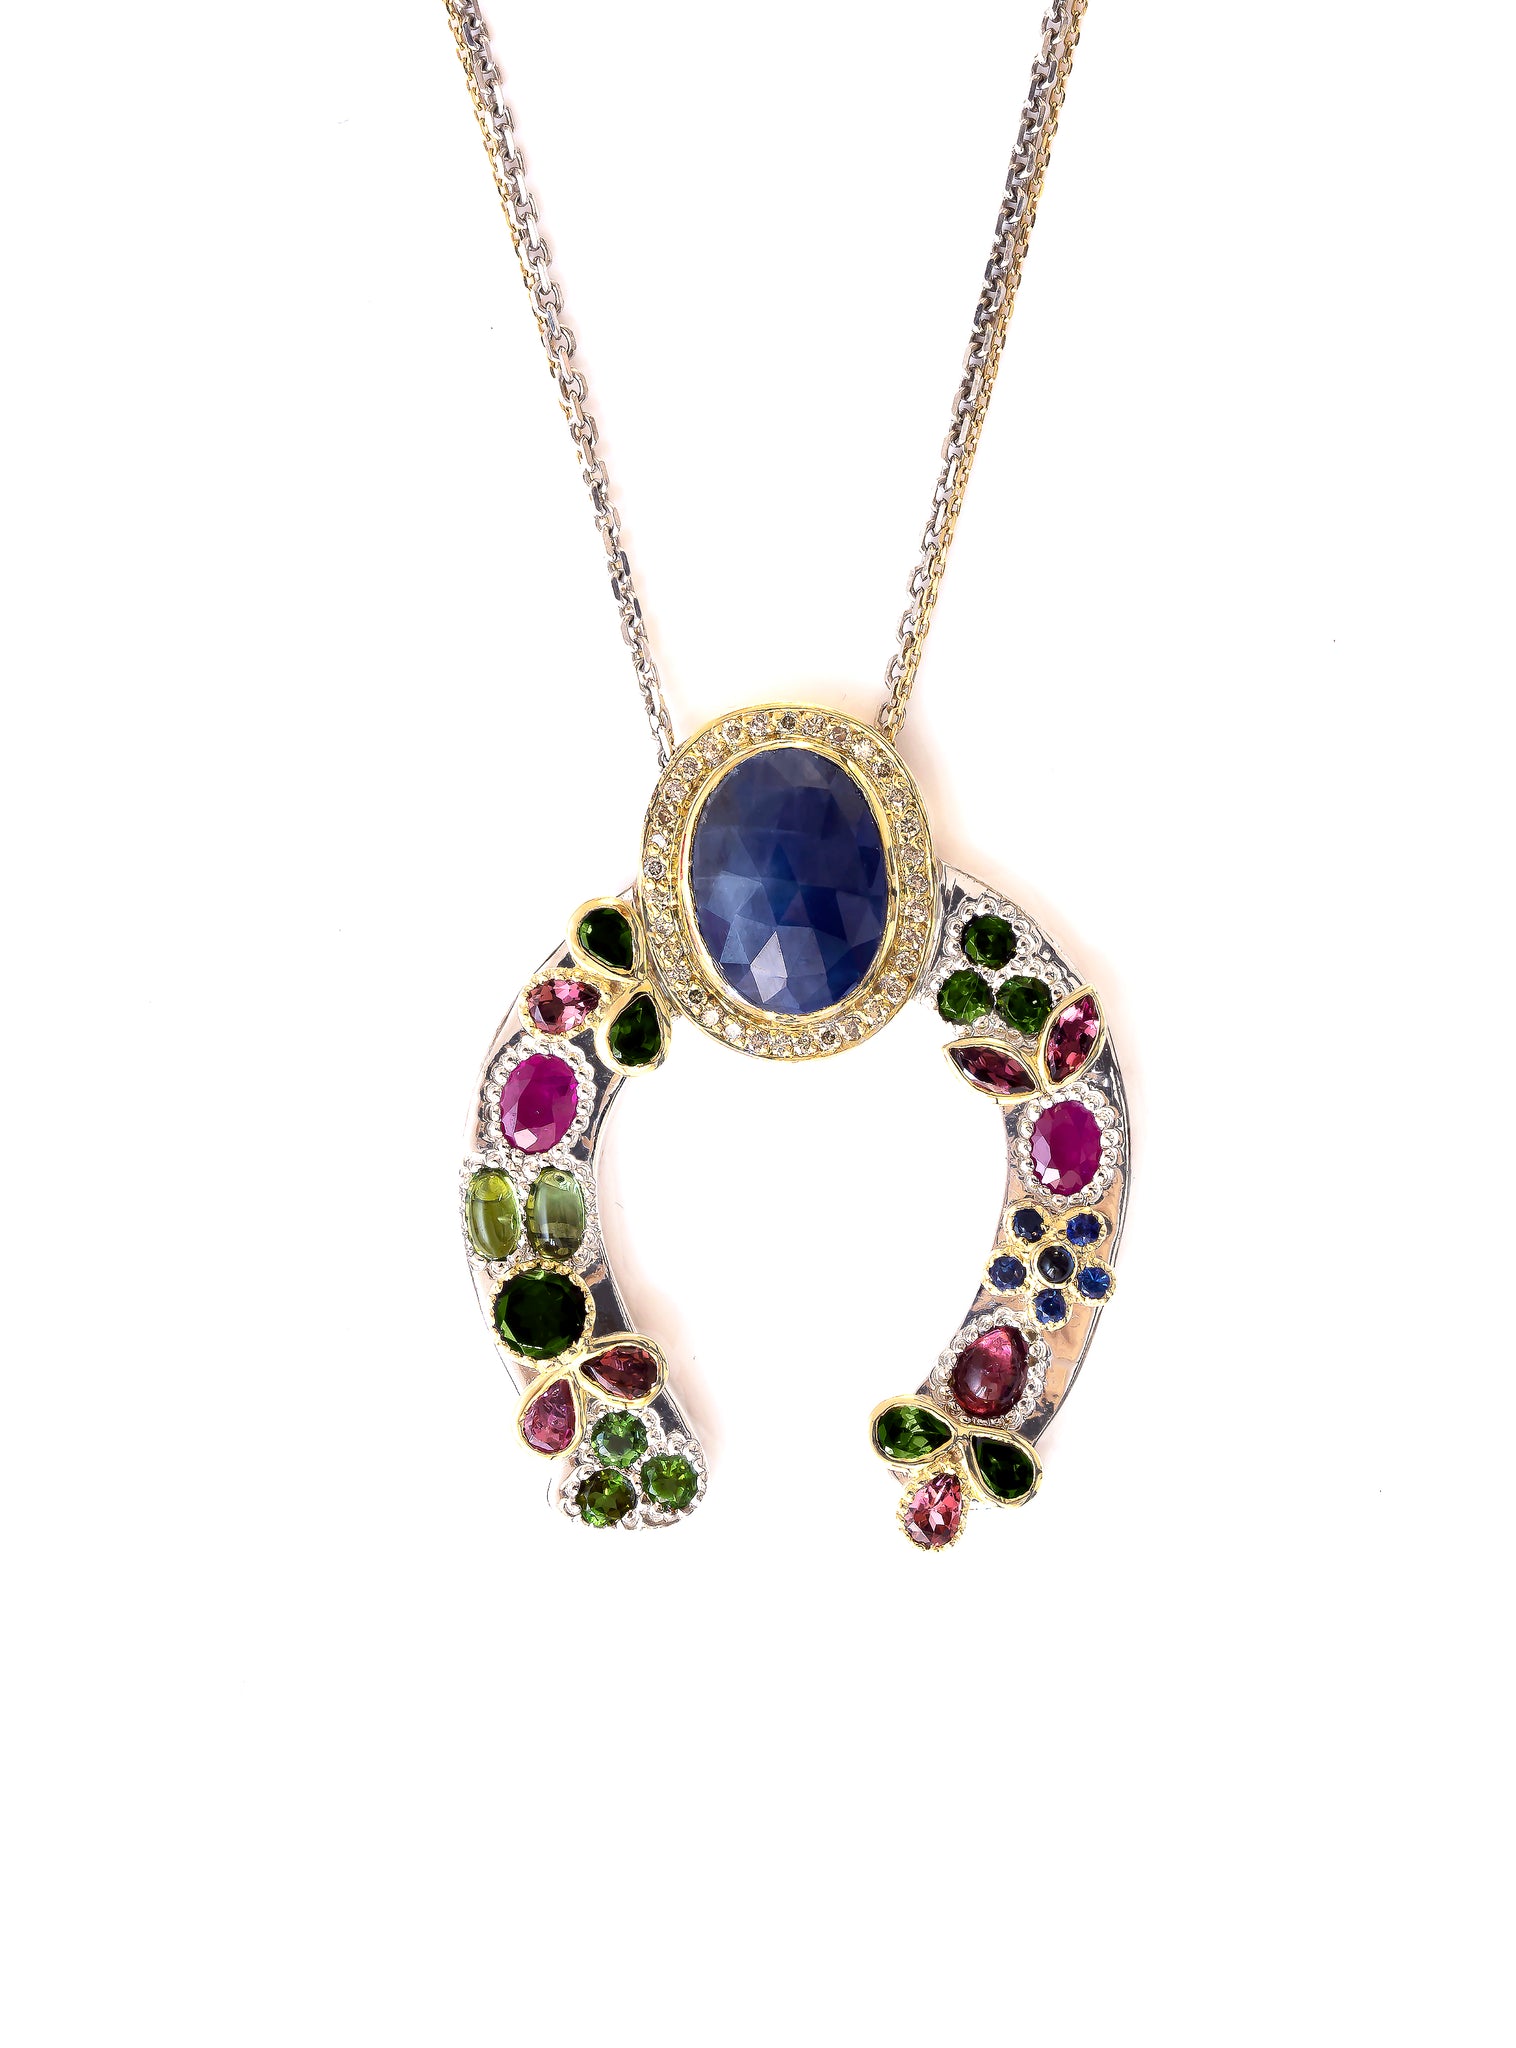 Horseshoe Necklace with Blue Sapphire and Diamond Crown